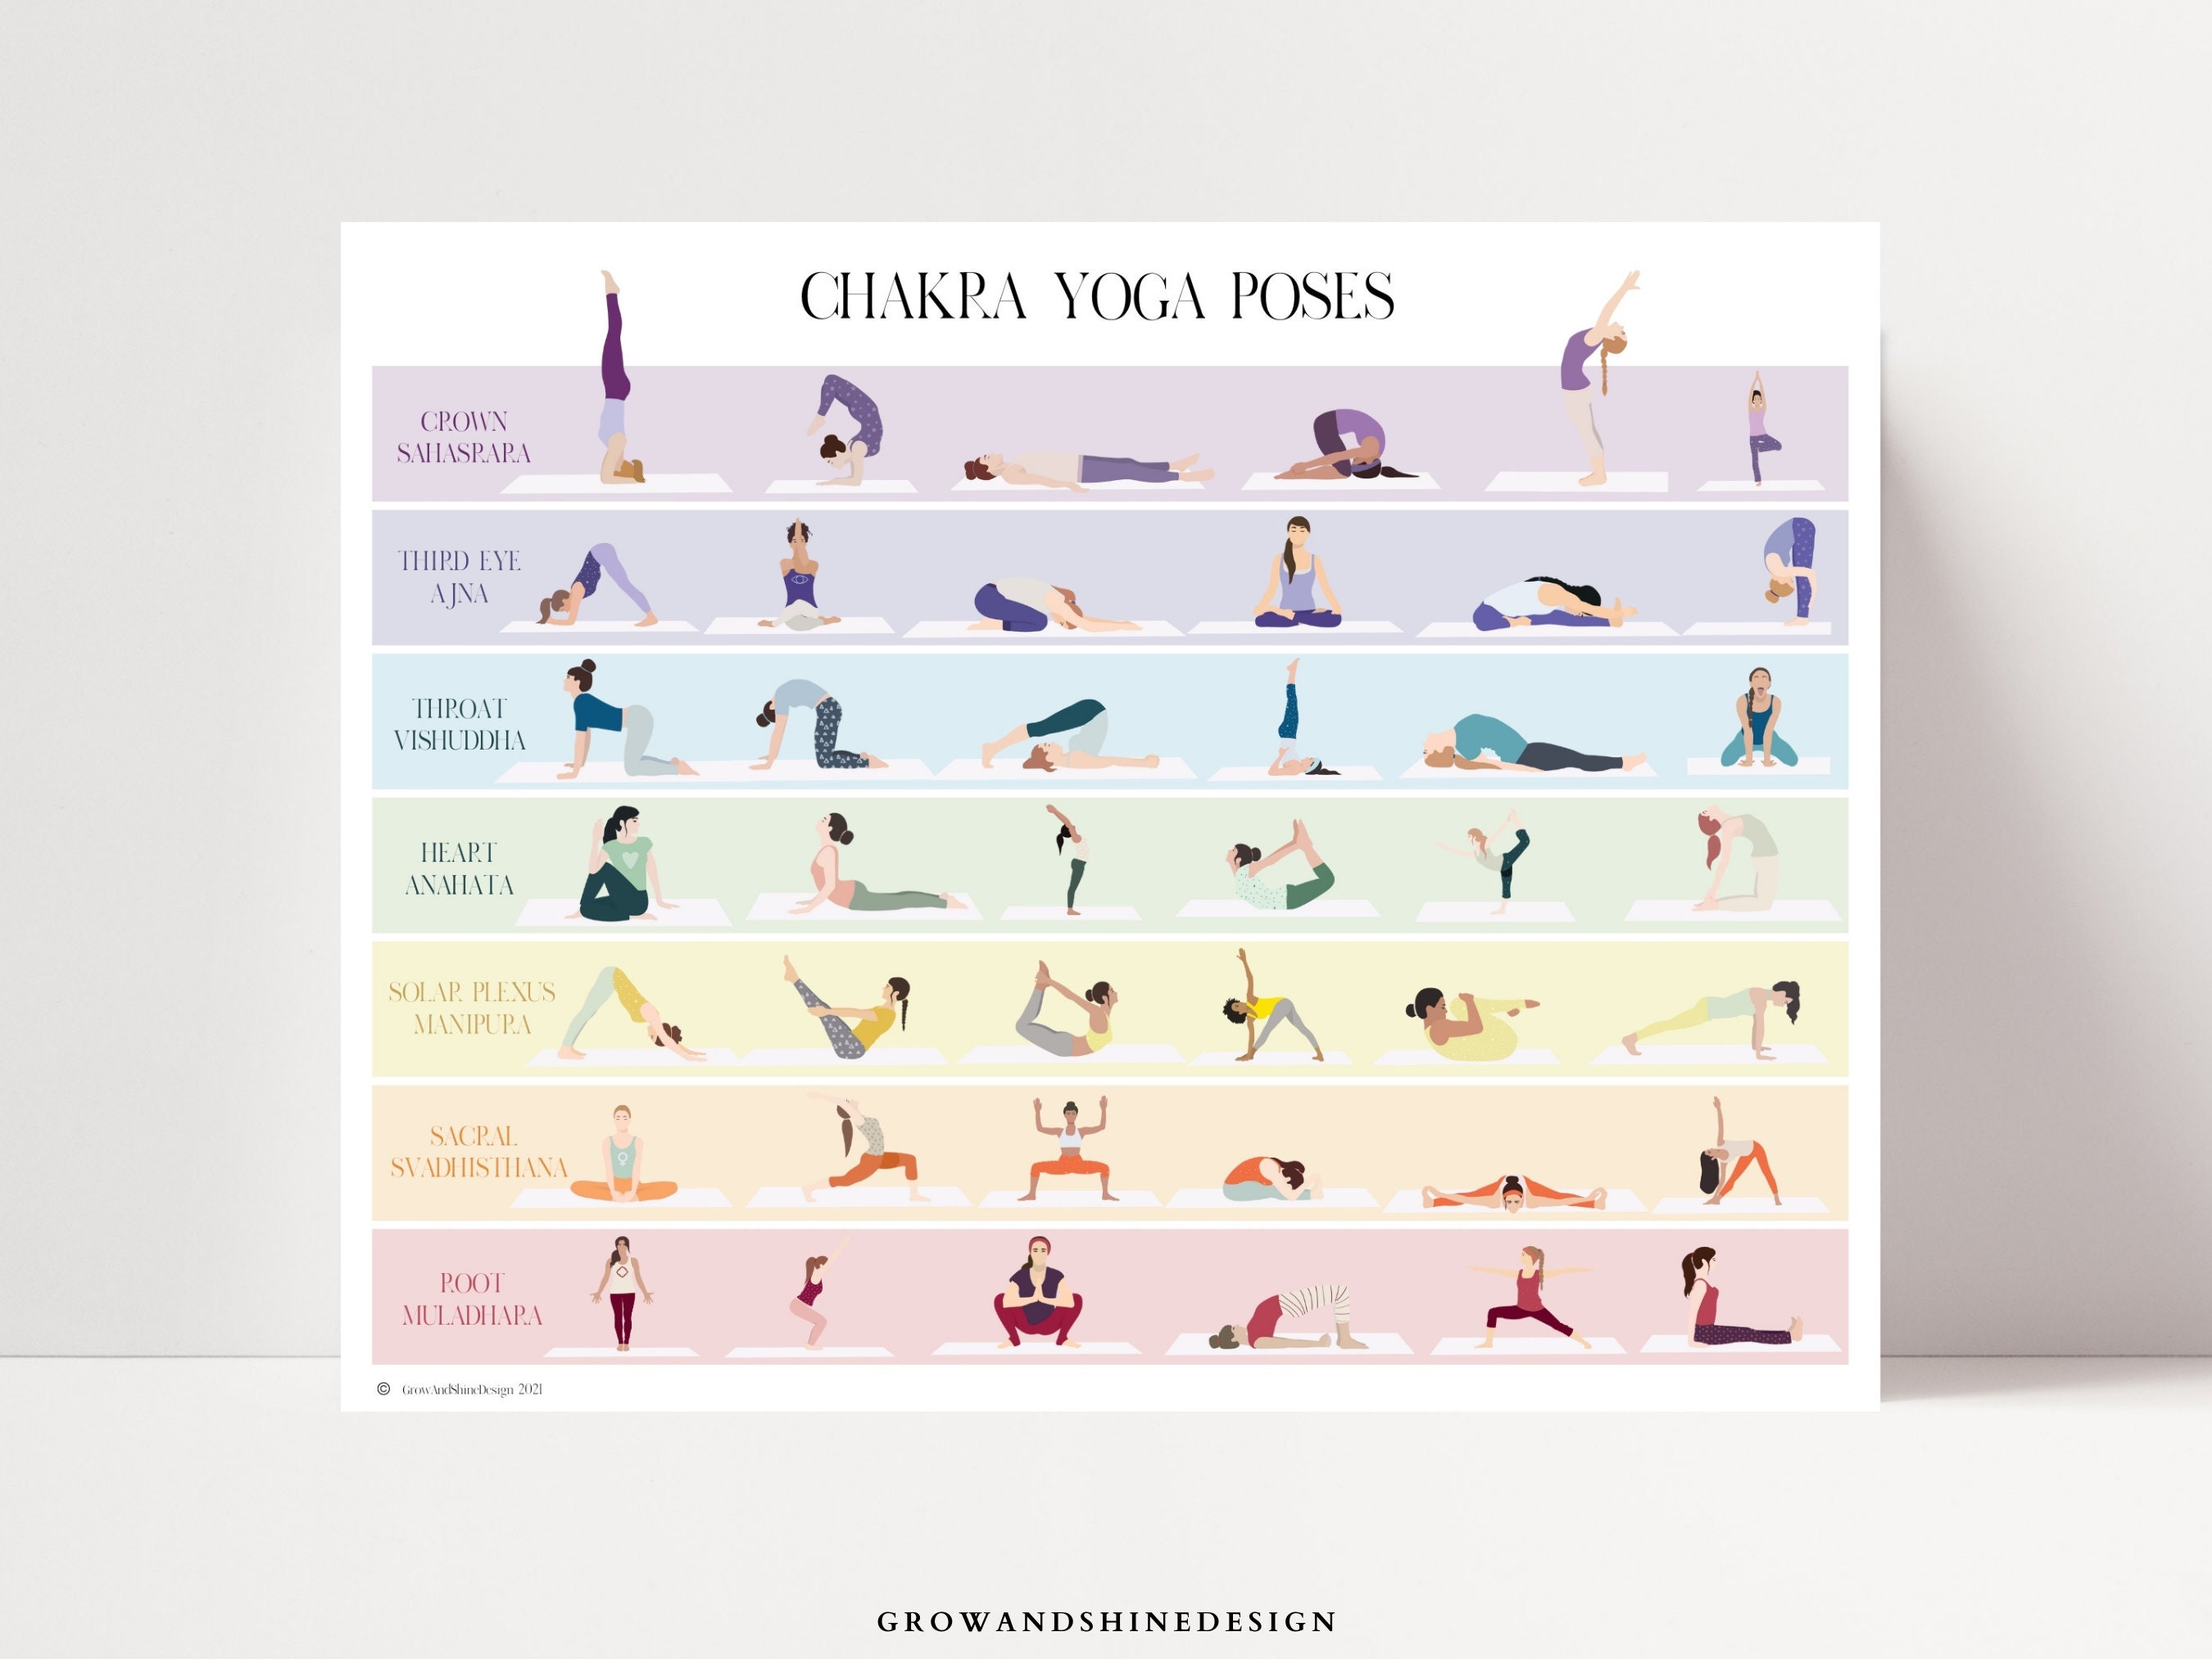 Luxury Hip Yoga Poses Poster-Stretching Tight Hip Yoga Charts-Full Body  Workout Meditation Yoga Position Chart Canvas Prints Yoga Gift 20x26in